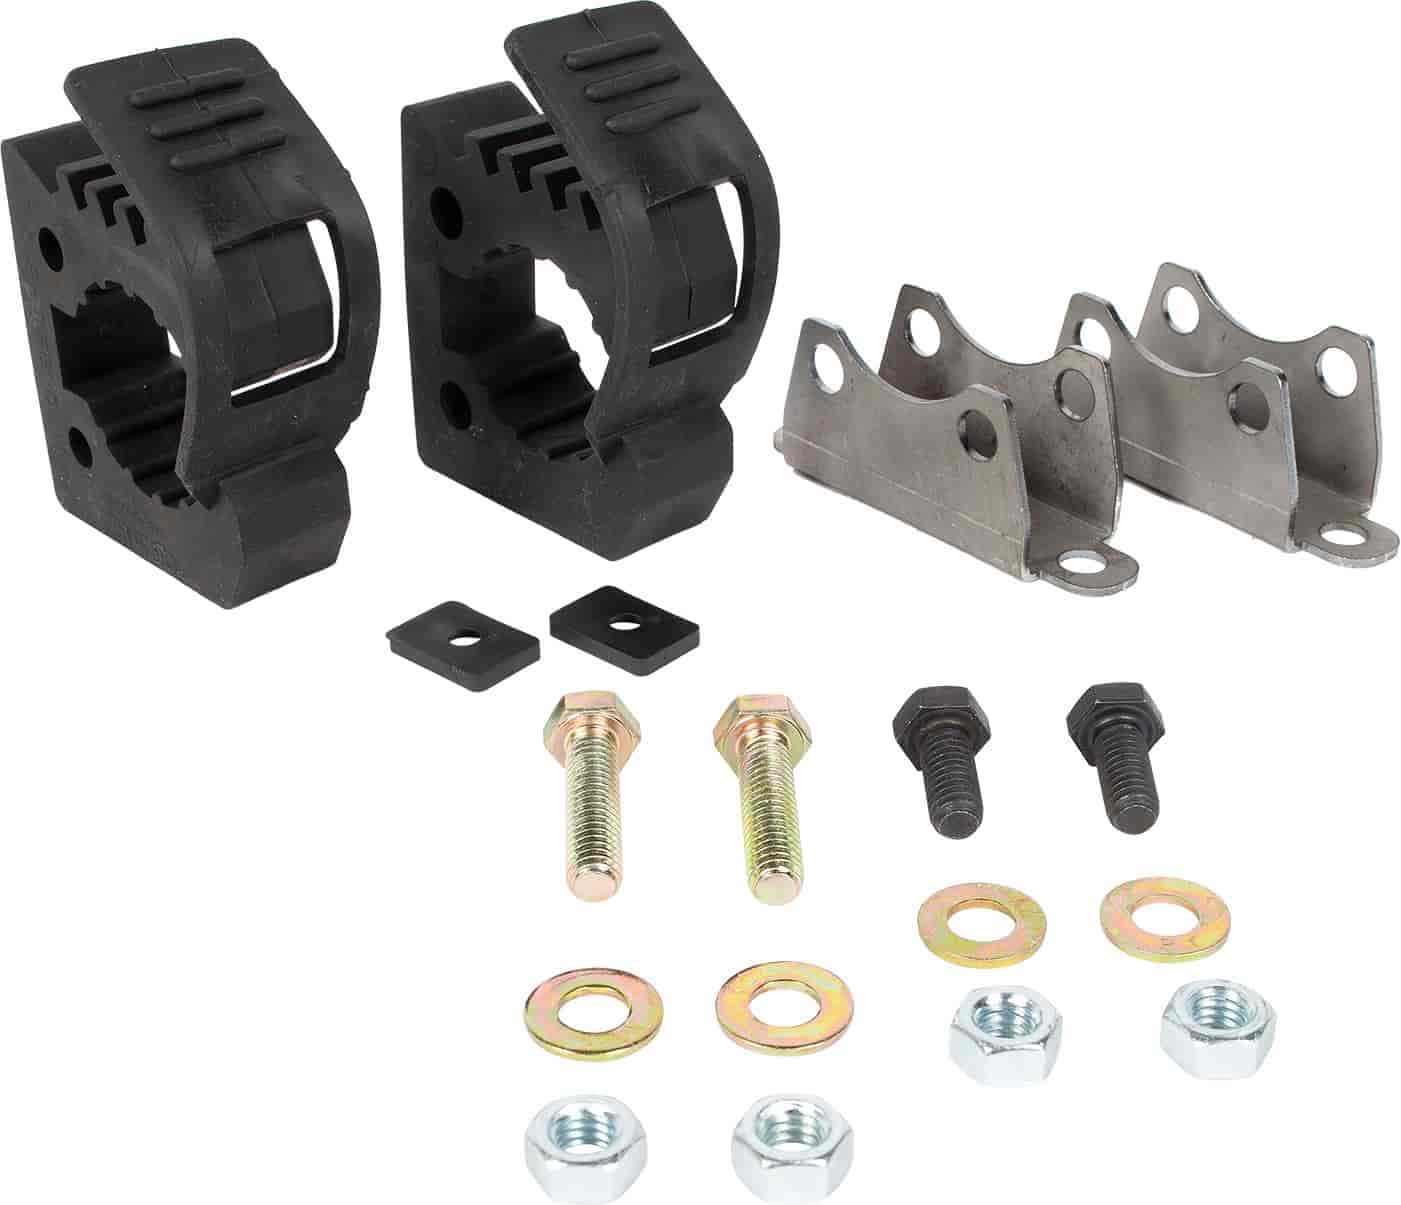 Quick Fist Clamps and Mounting Kit